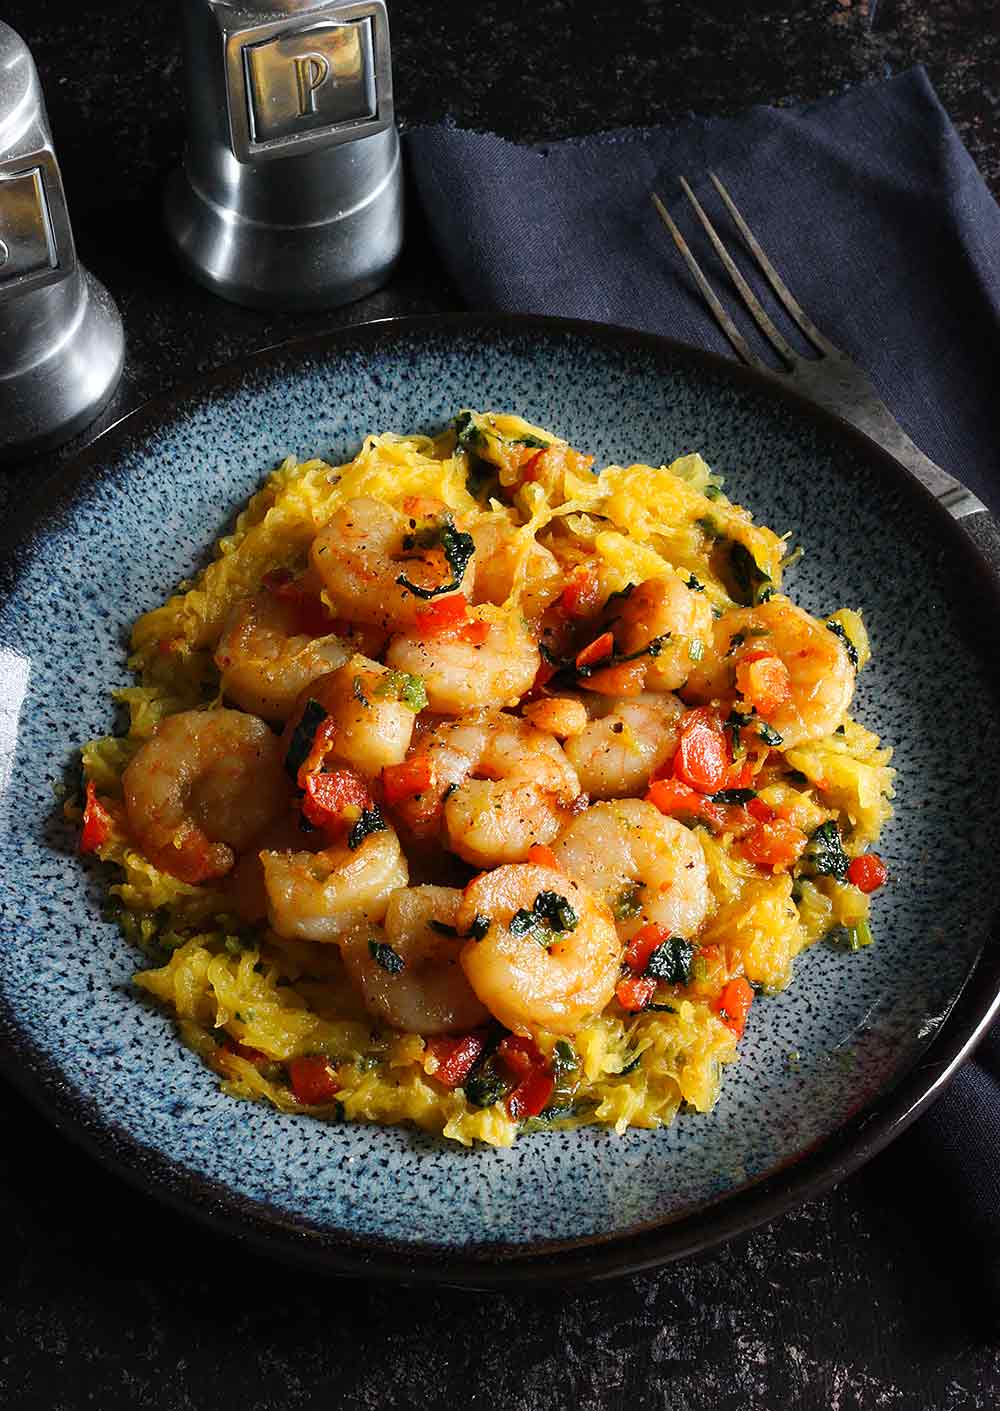 A plate of shrimp and vegetables over spaghetti squash, ready to serve.